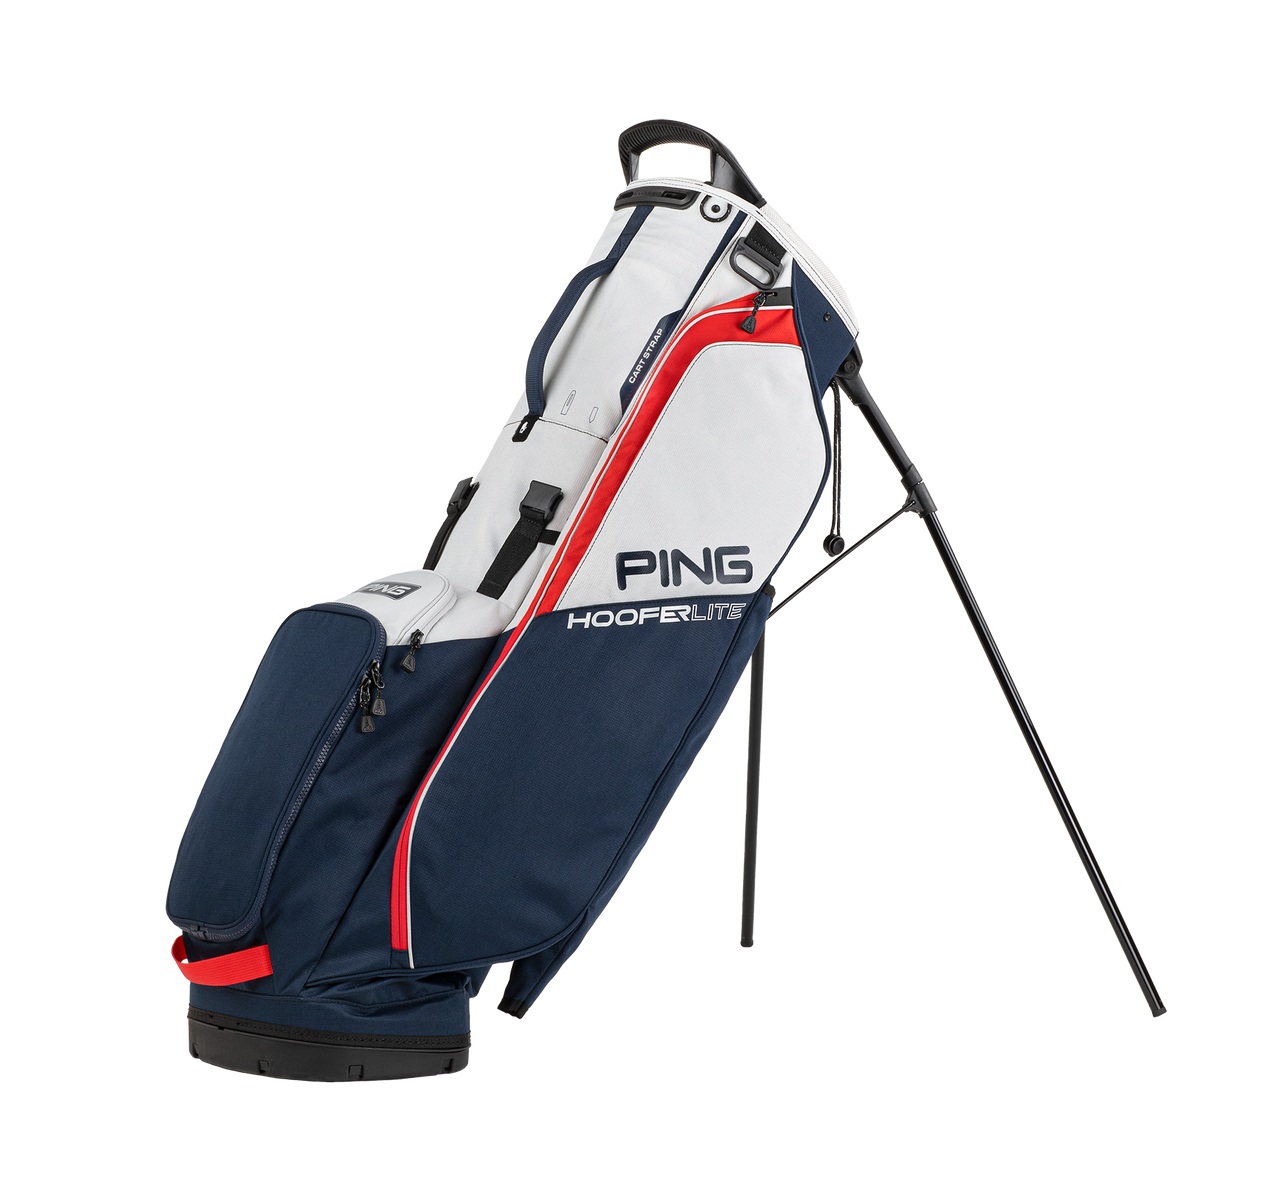 PING 2020 Hoofer 14 Stand Golf Bag | Dick's Sporting Goods